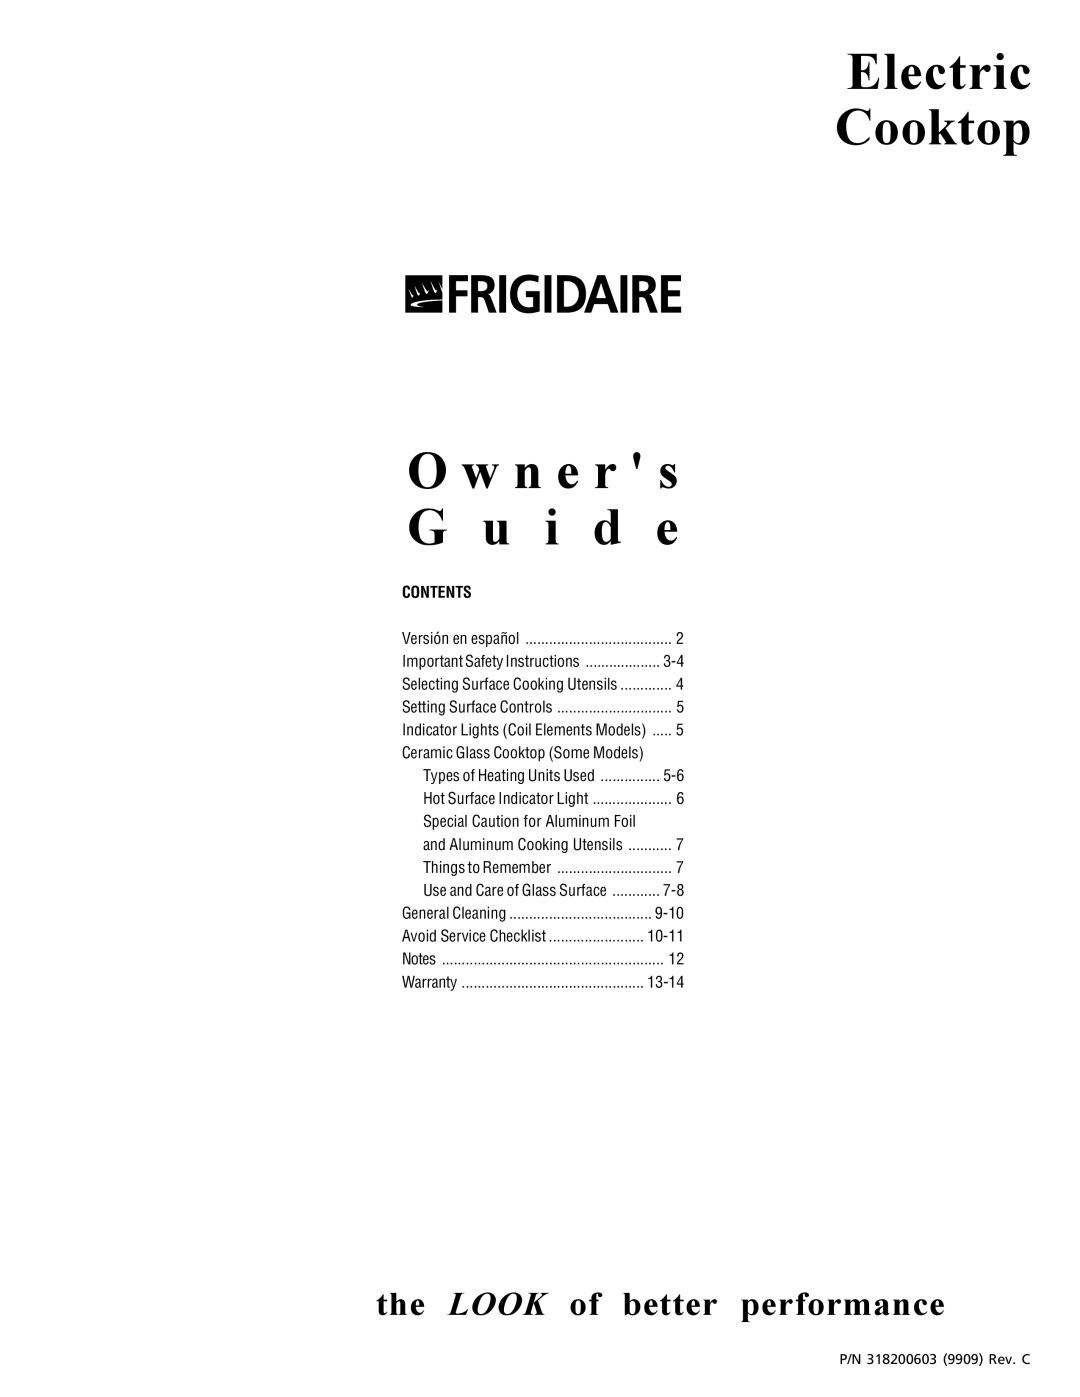 Frigidaire 318200603 important safety instructions Electric Cooktop, O w n e r s, the LOOK of better performance, 9-10 